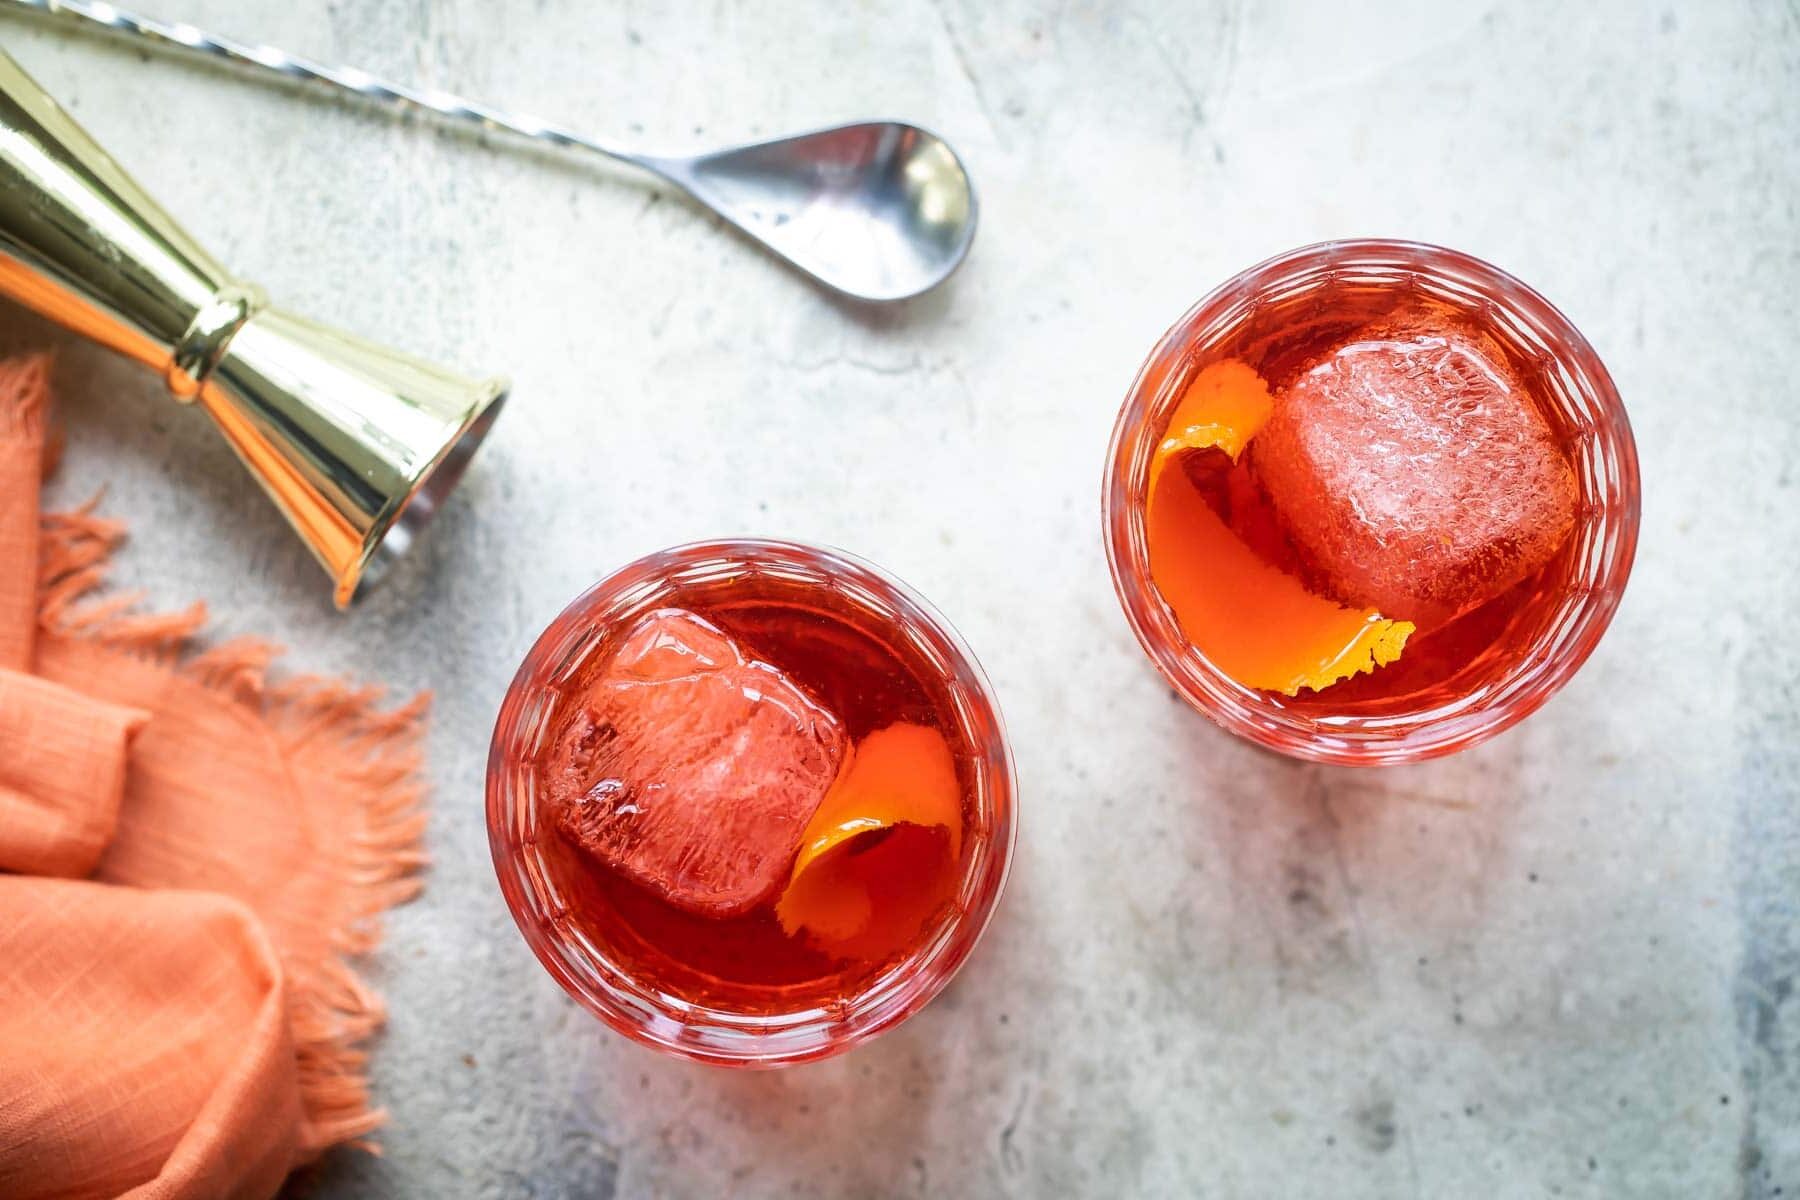 A negroni cocktail in a rocks glass.